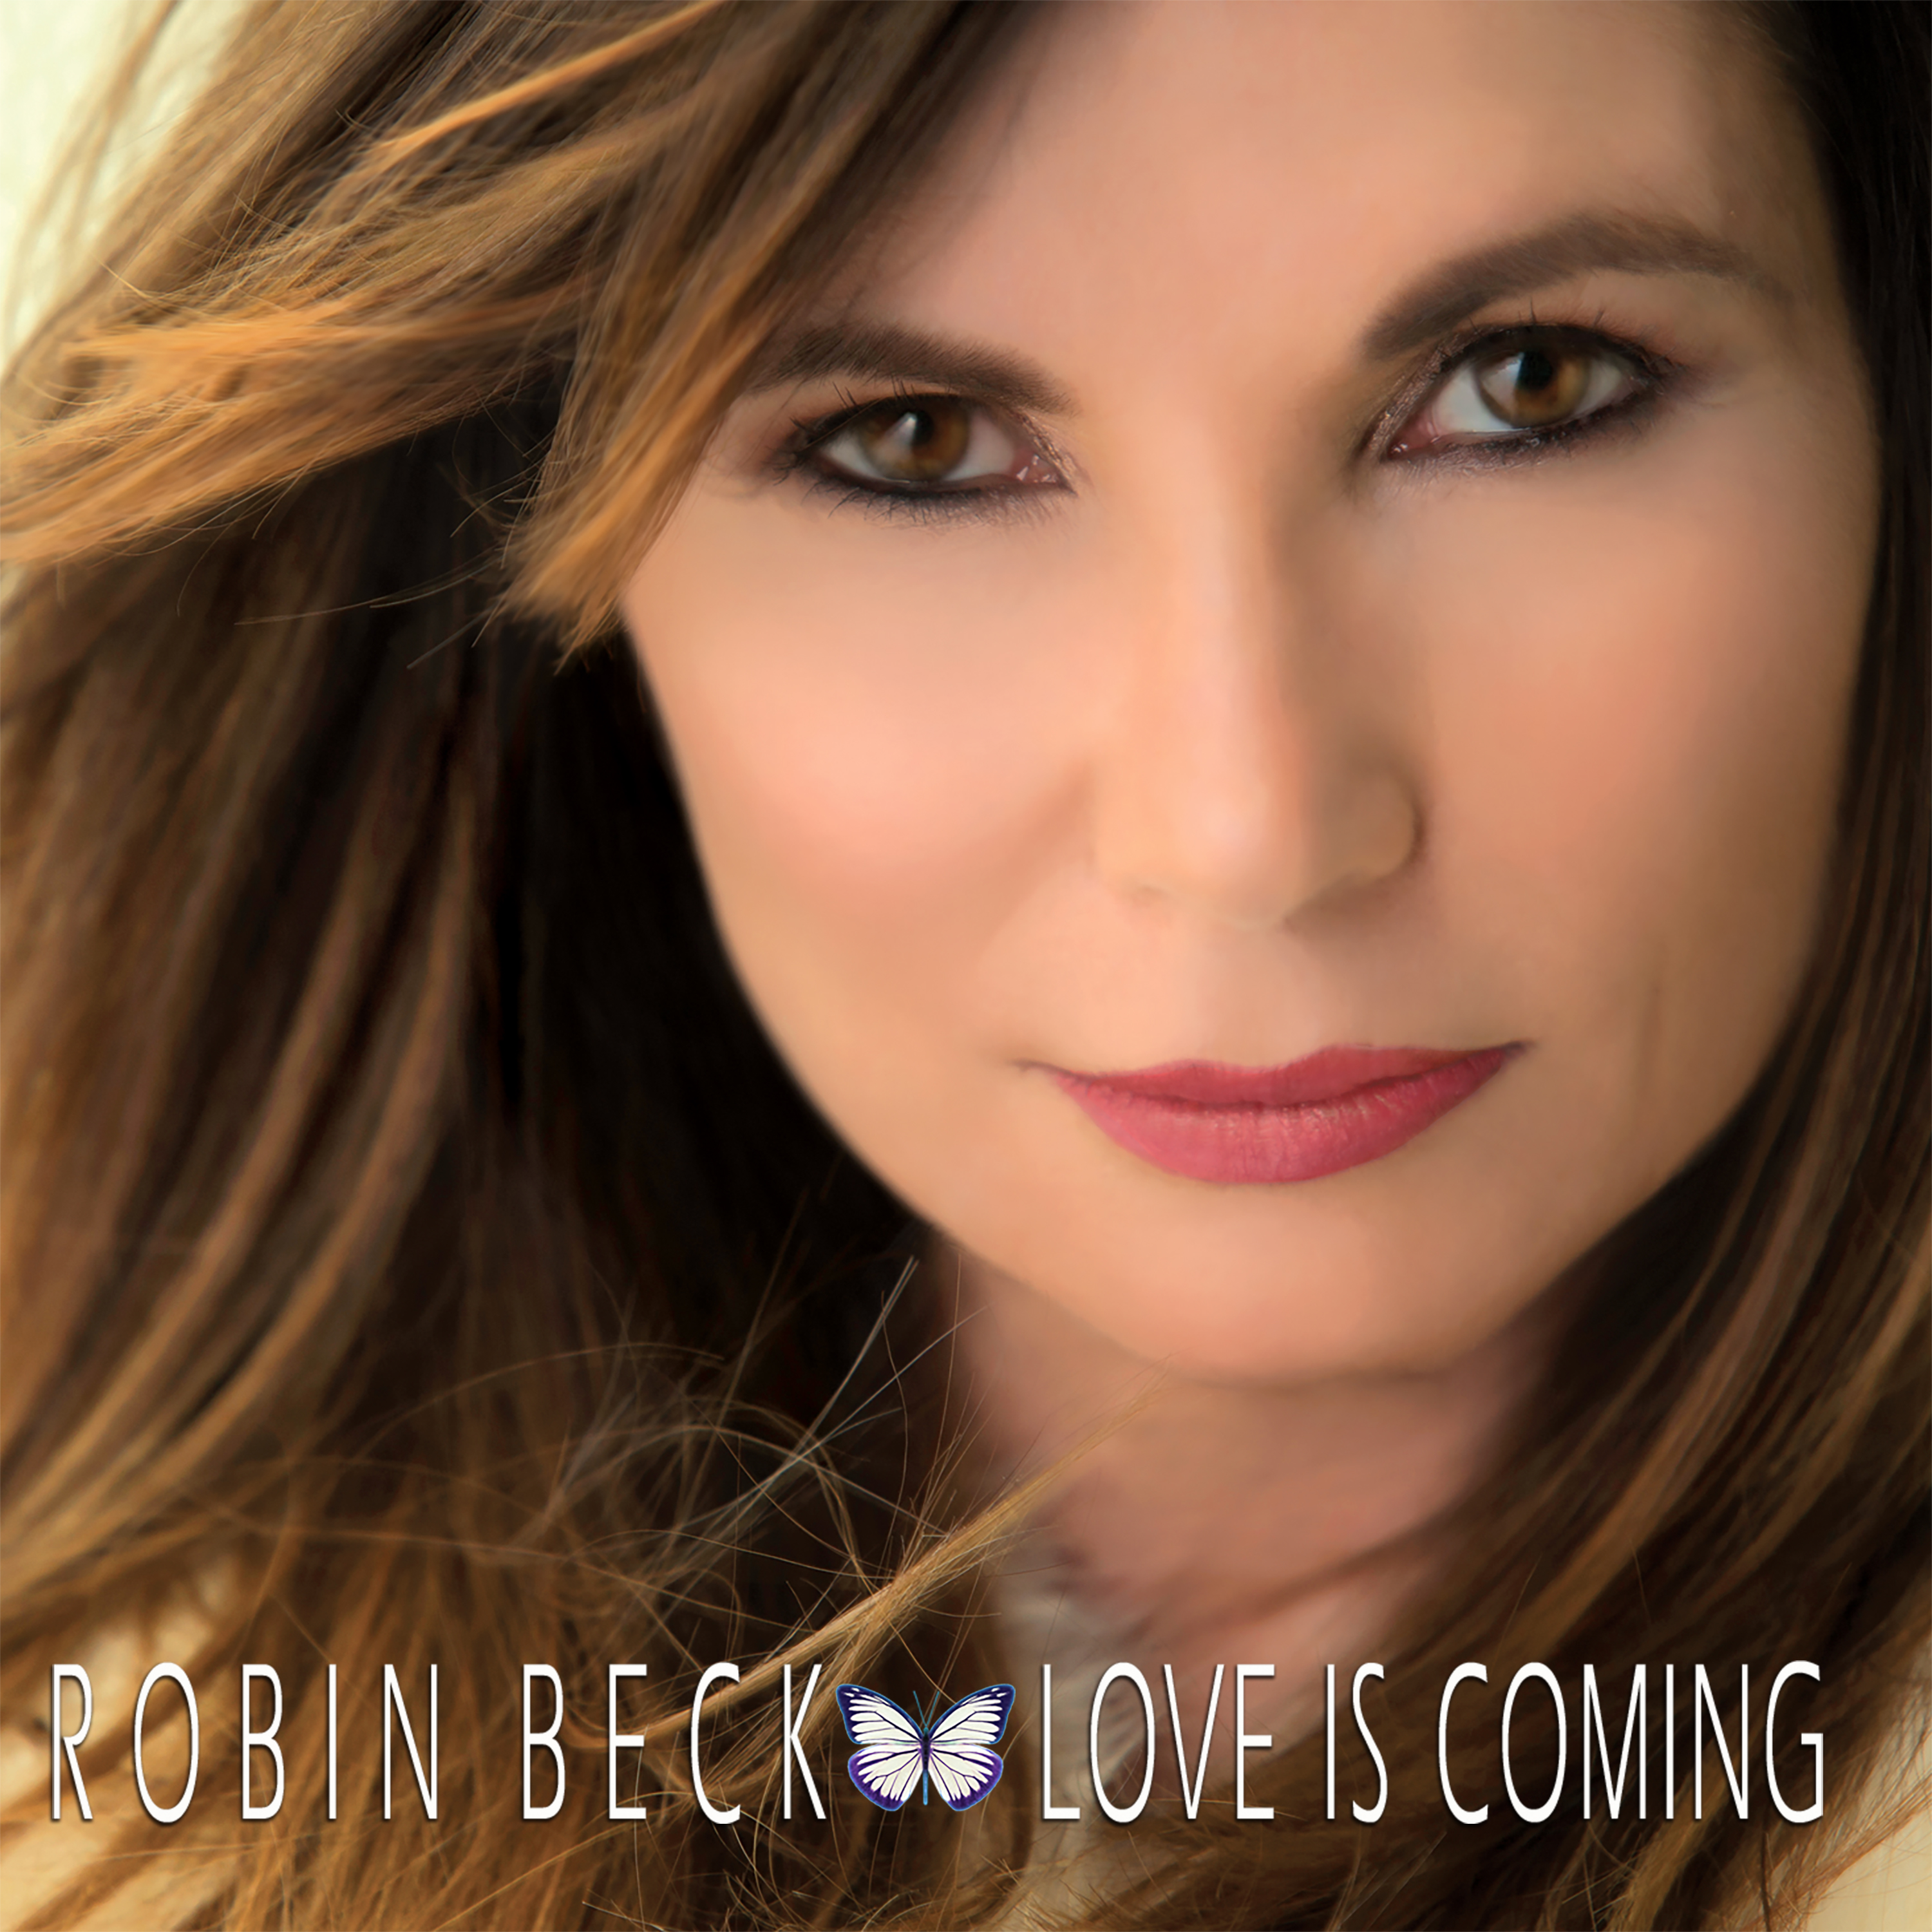 ROBIN BECK – COVER